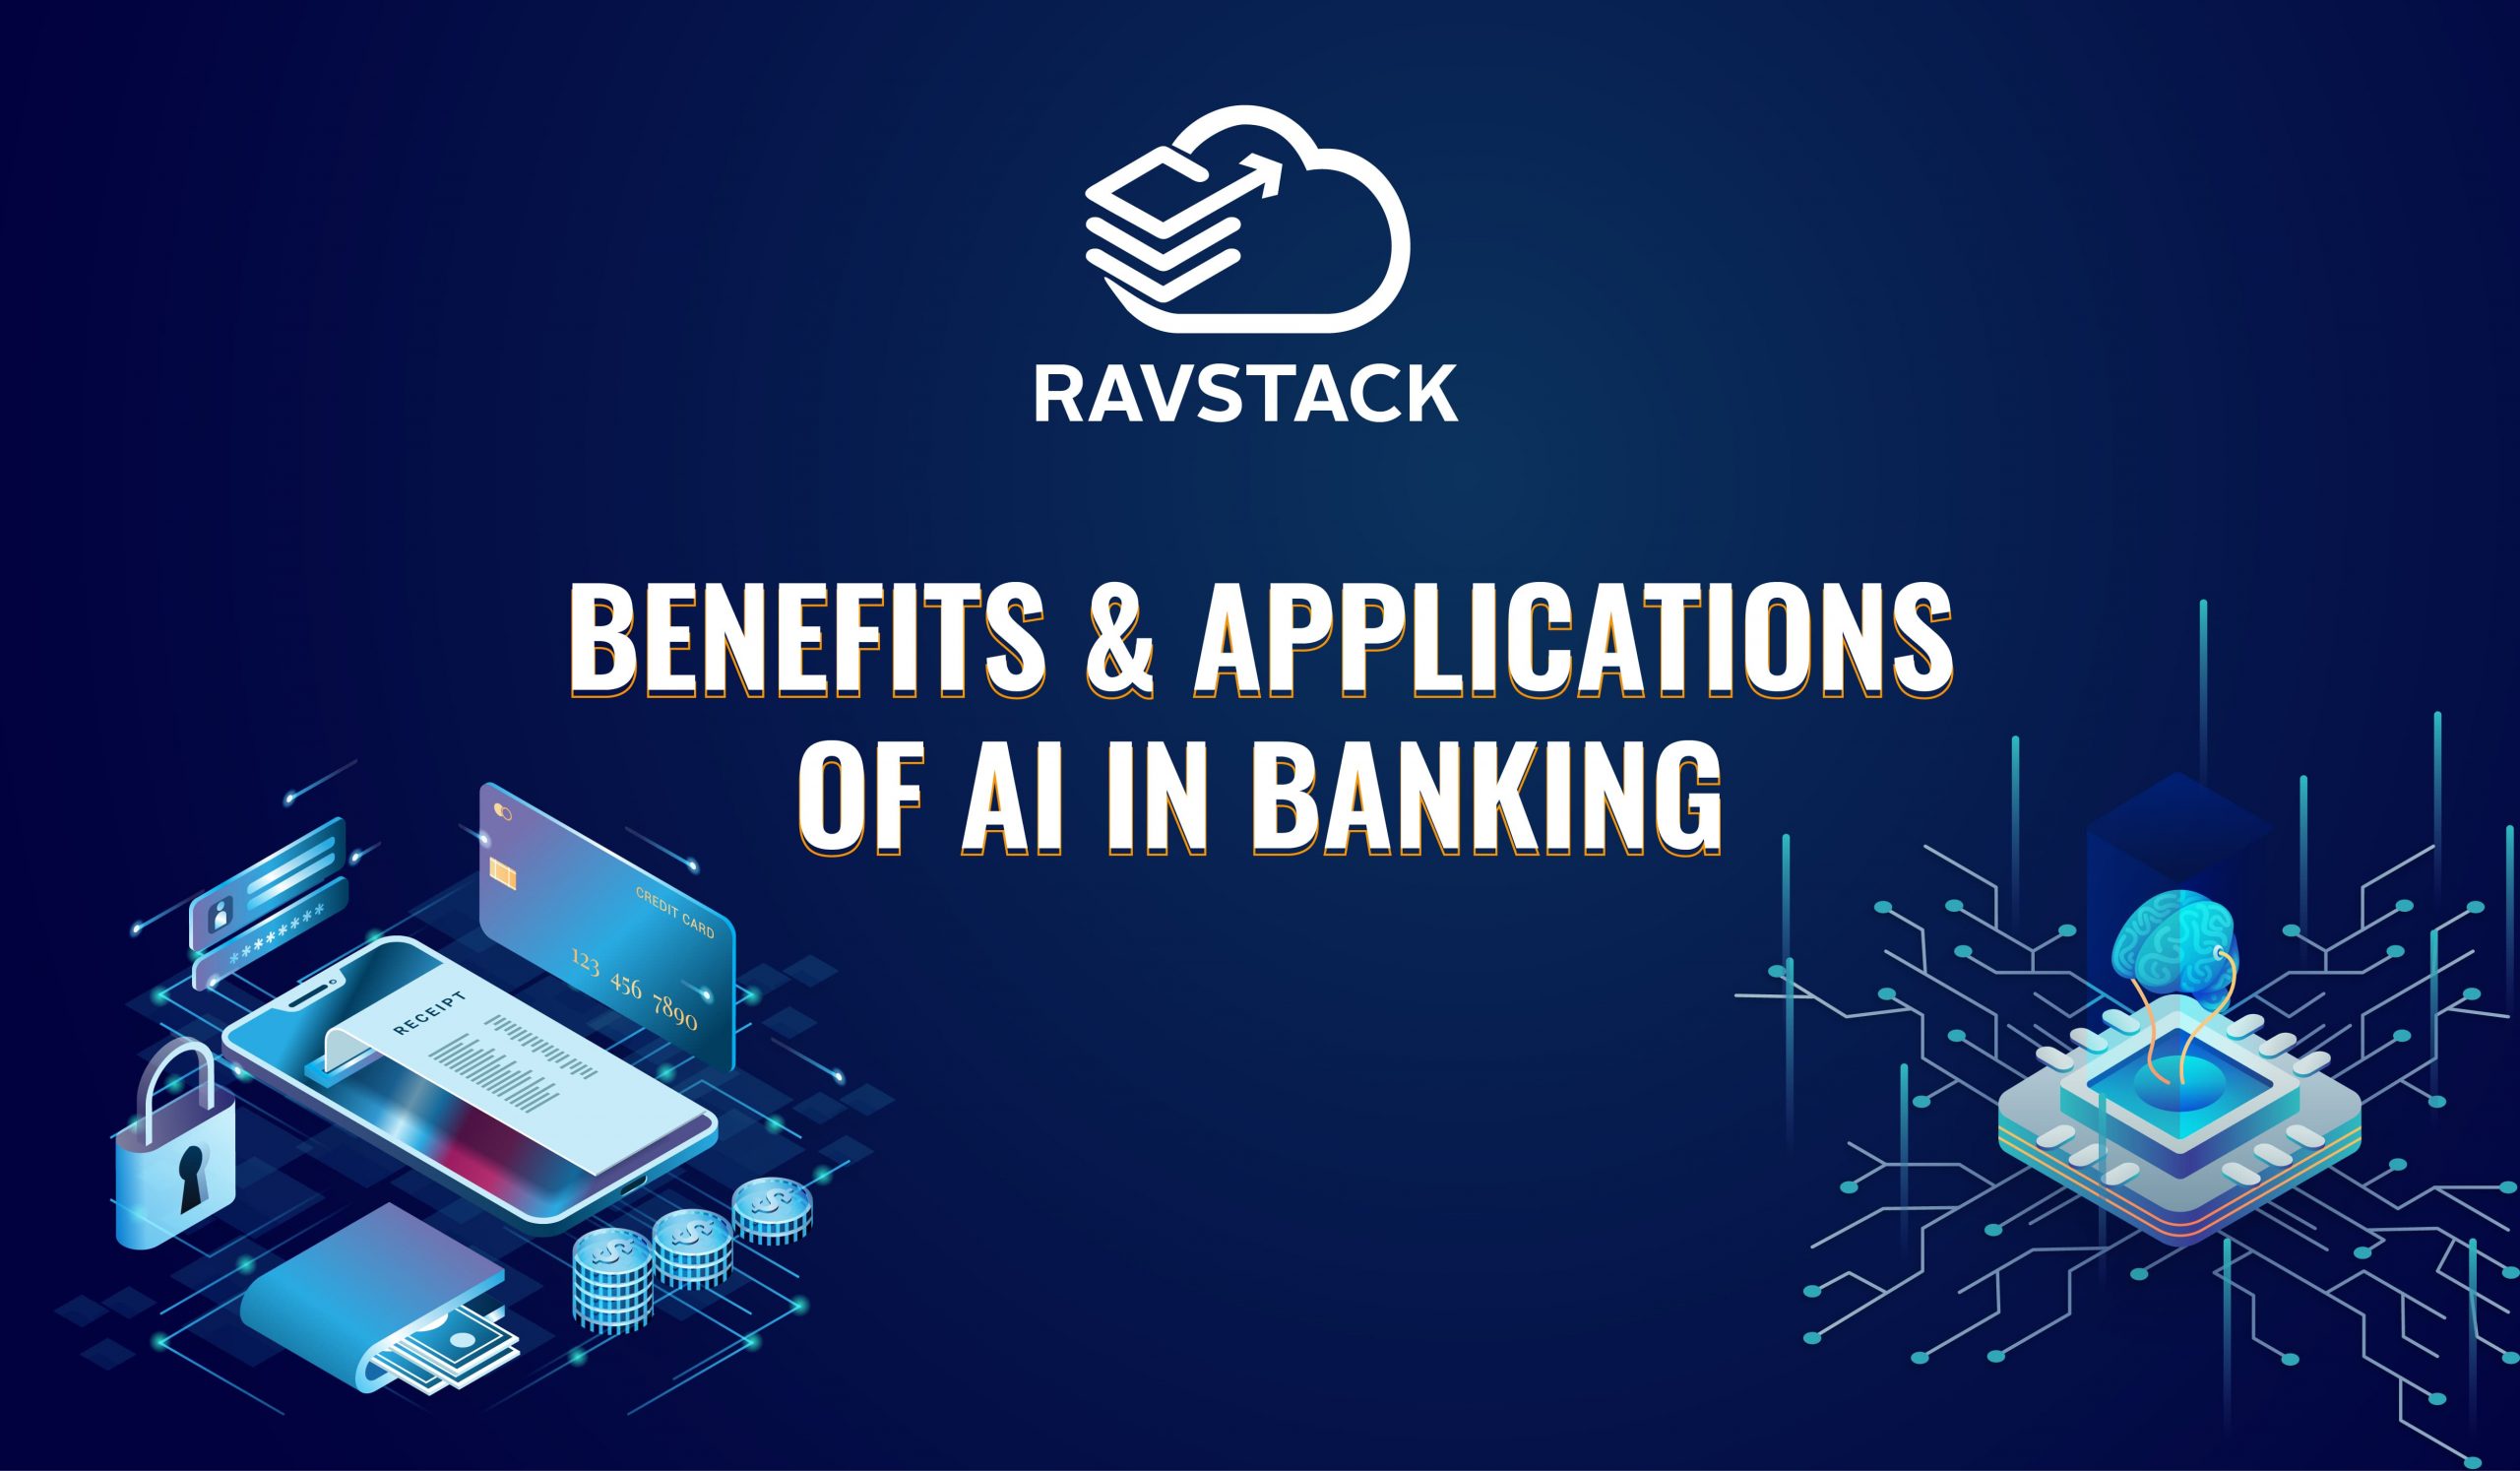 Benefits and applications for AI in banking